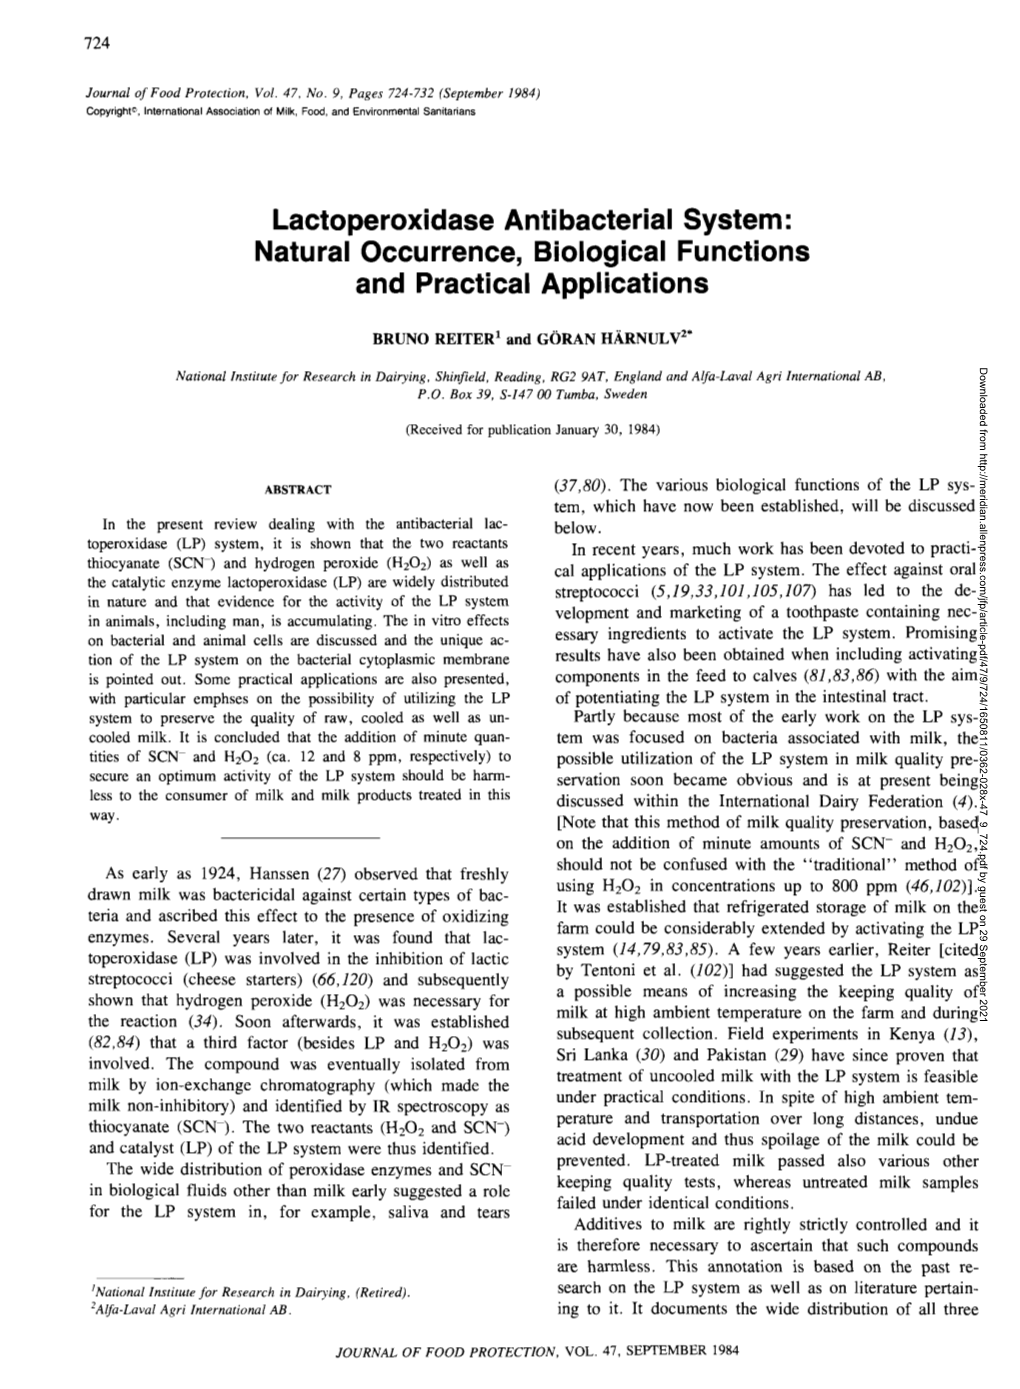 Lactoperoxidase Antibacterial System: Natural Occurrence, Biological Functions and Practical Applications